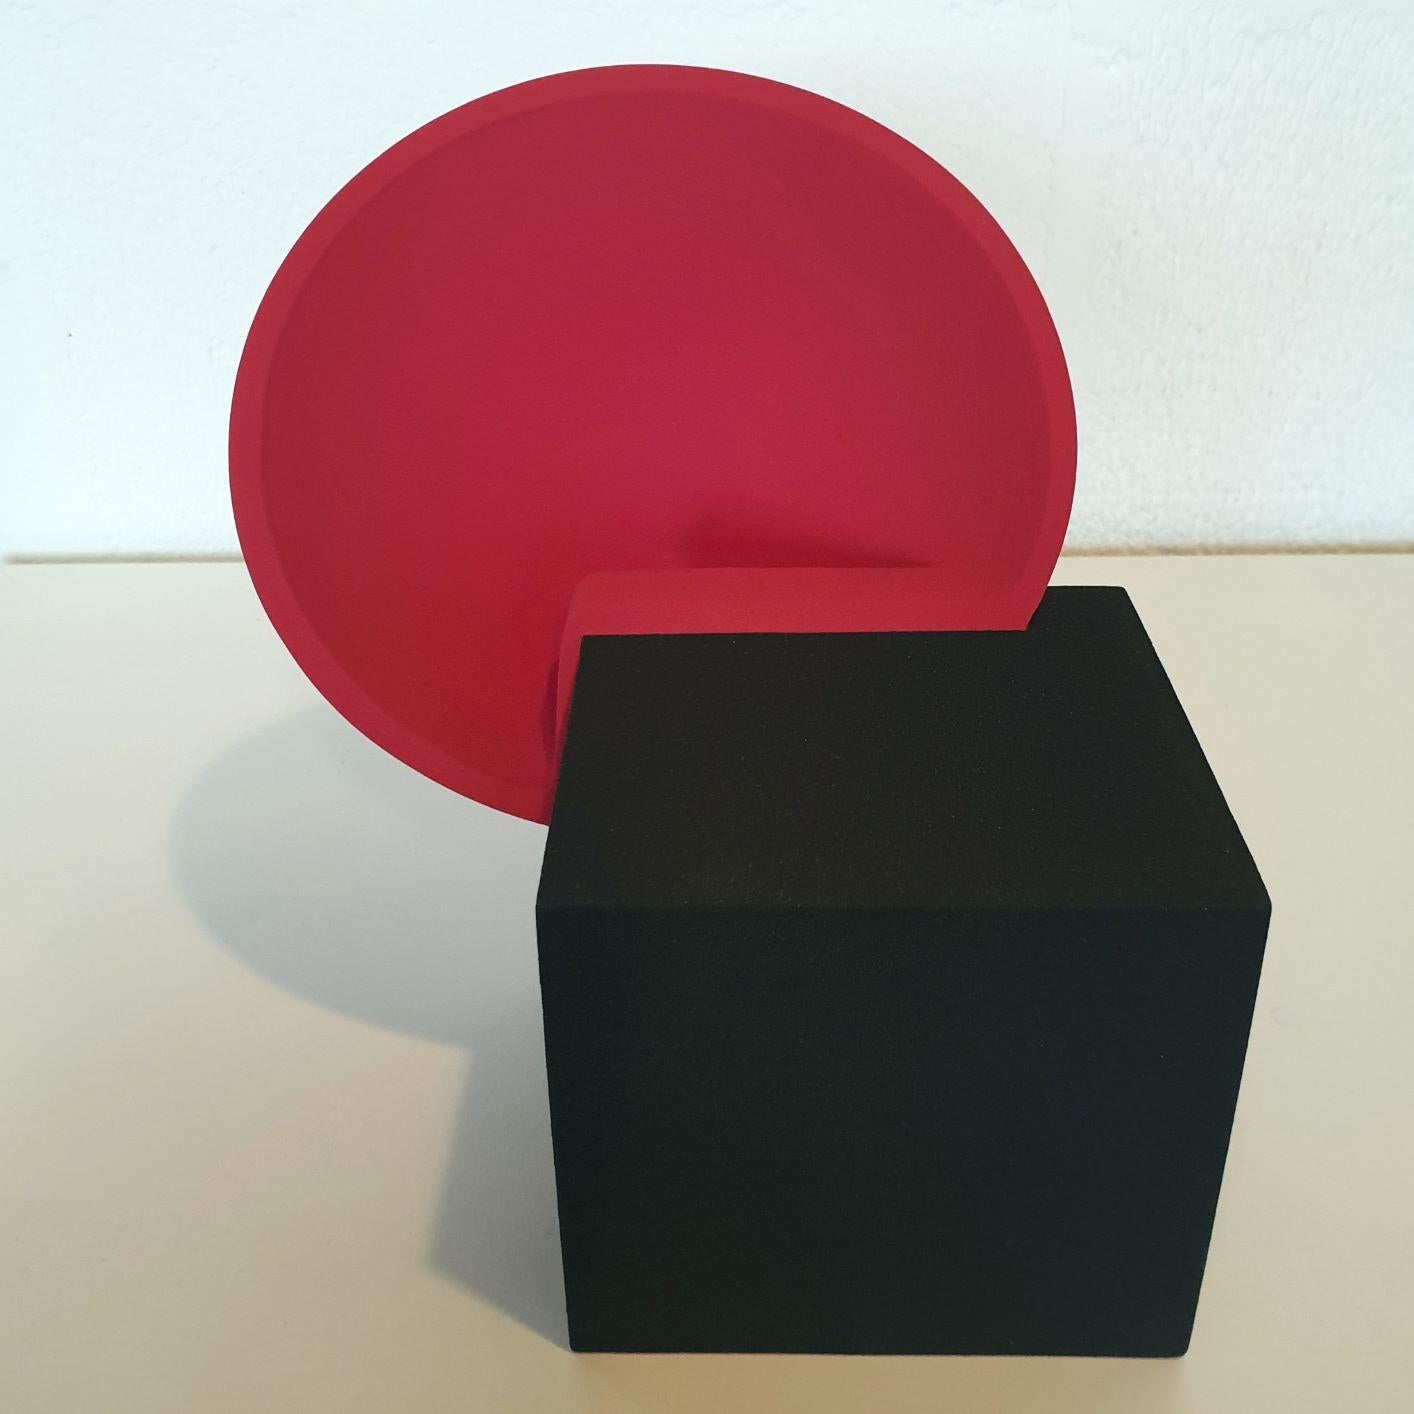 SC1601 red - contemporary modern abstract geometric ceramic object sculpture - Gray Abstract Sculpture by Let de Kok